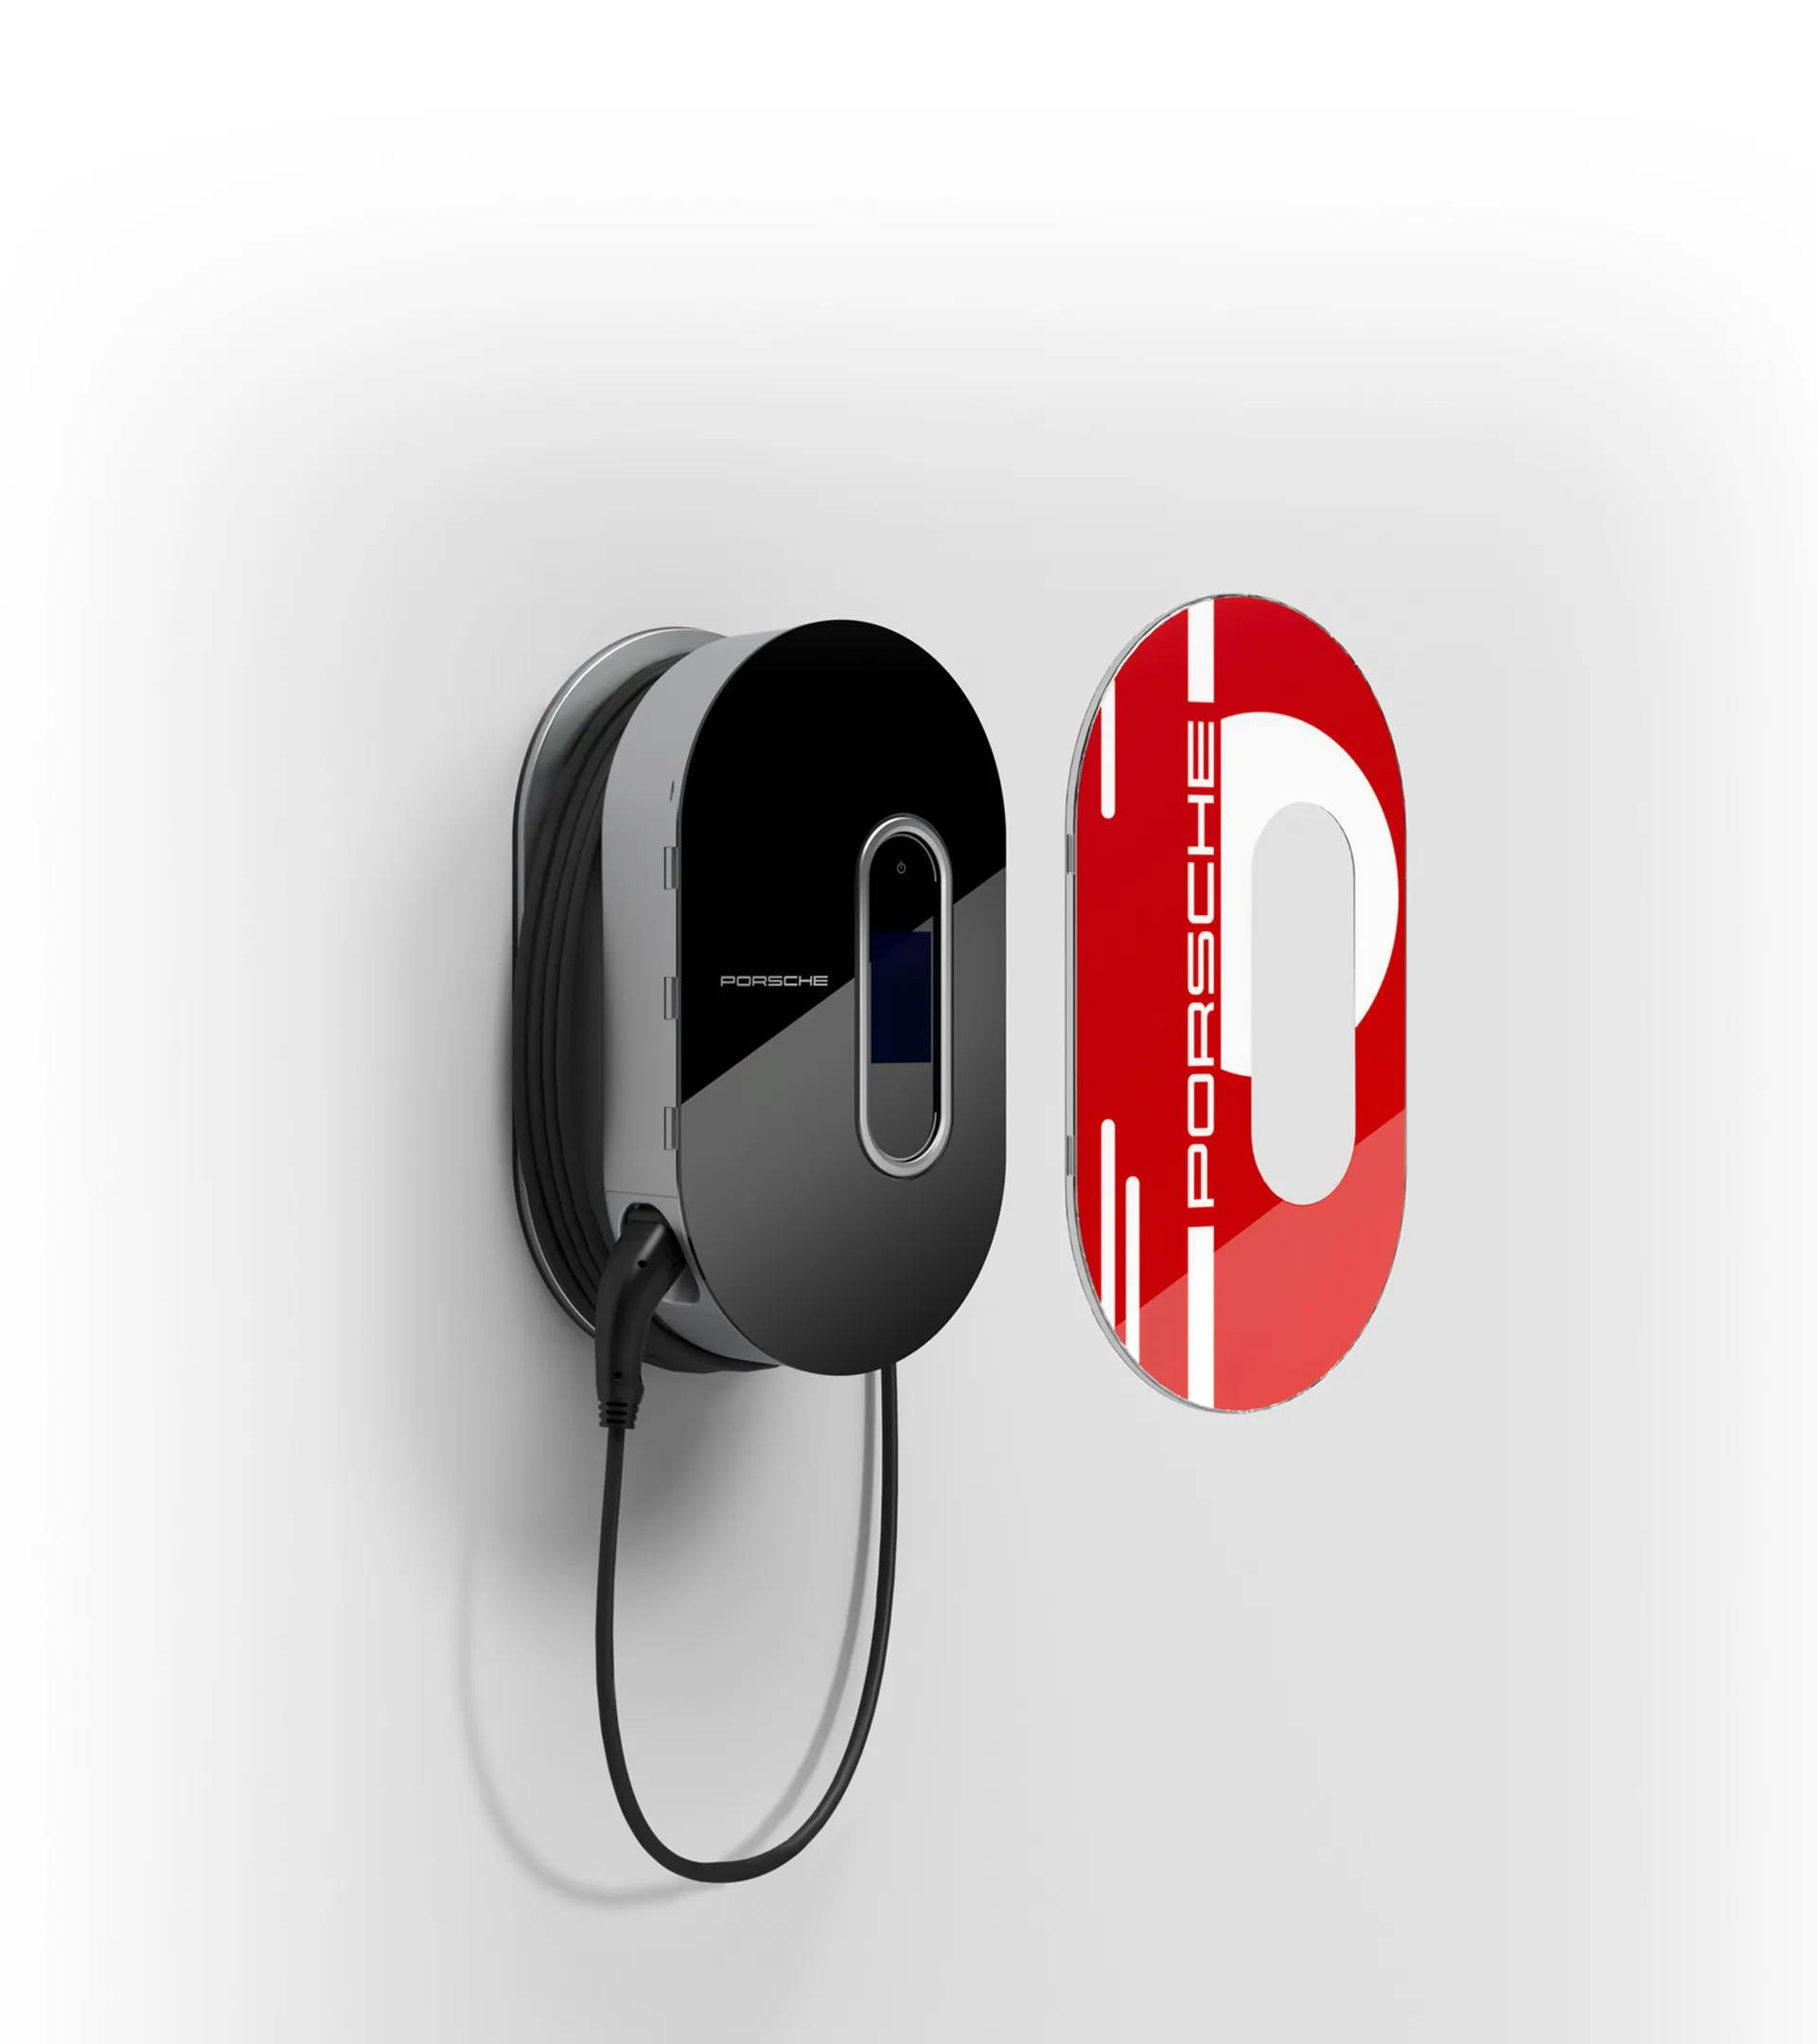 Design cover for open Charging Dock 3